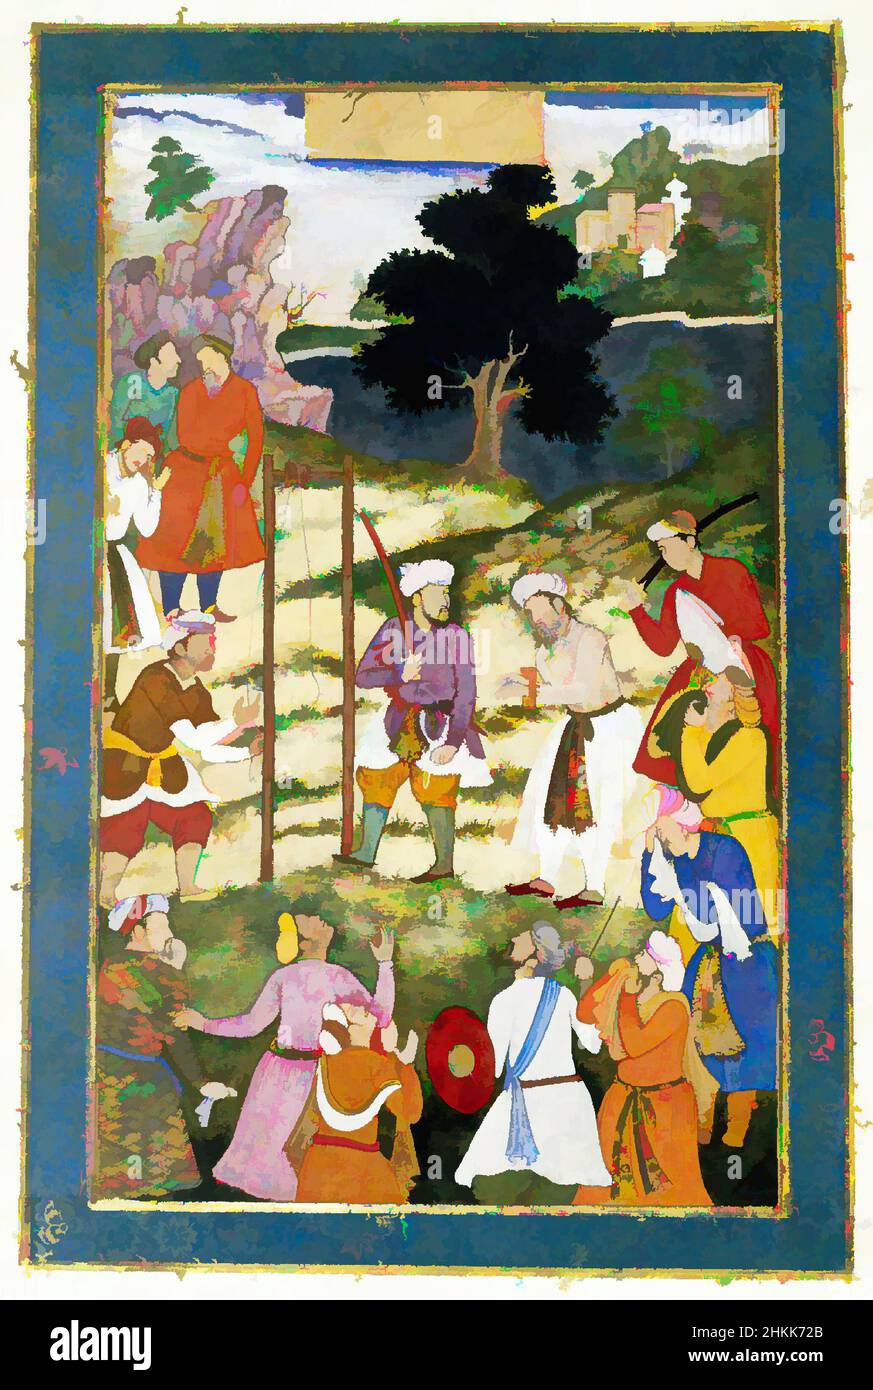 Art inspired by The Execution of Mansur Hallaj, from the Warren Hastings Album, Indian, Opaque watercolor on paper, 1600-1605, Mughal, Reign of Akbar, Sheet: 15 1/4 x 11 3/16 in., 38.7 x 28.4 cm, Akbar, Allahabad, crowd, event, Execution, gallows, Hanging, history, Justice, killer, Classic works modernized by Artotop with a splash of modernity. Shapes, color and value, eye-catching visual impact on art. Emotions through freedom of artworks in a contemporary way. A timeless message pursuing a wildly creative new direction. Artists turning to the digital medium and creating the Artotop NFT Stock Photo